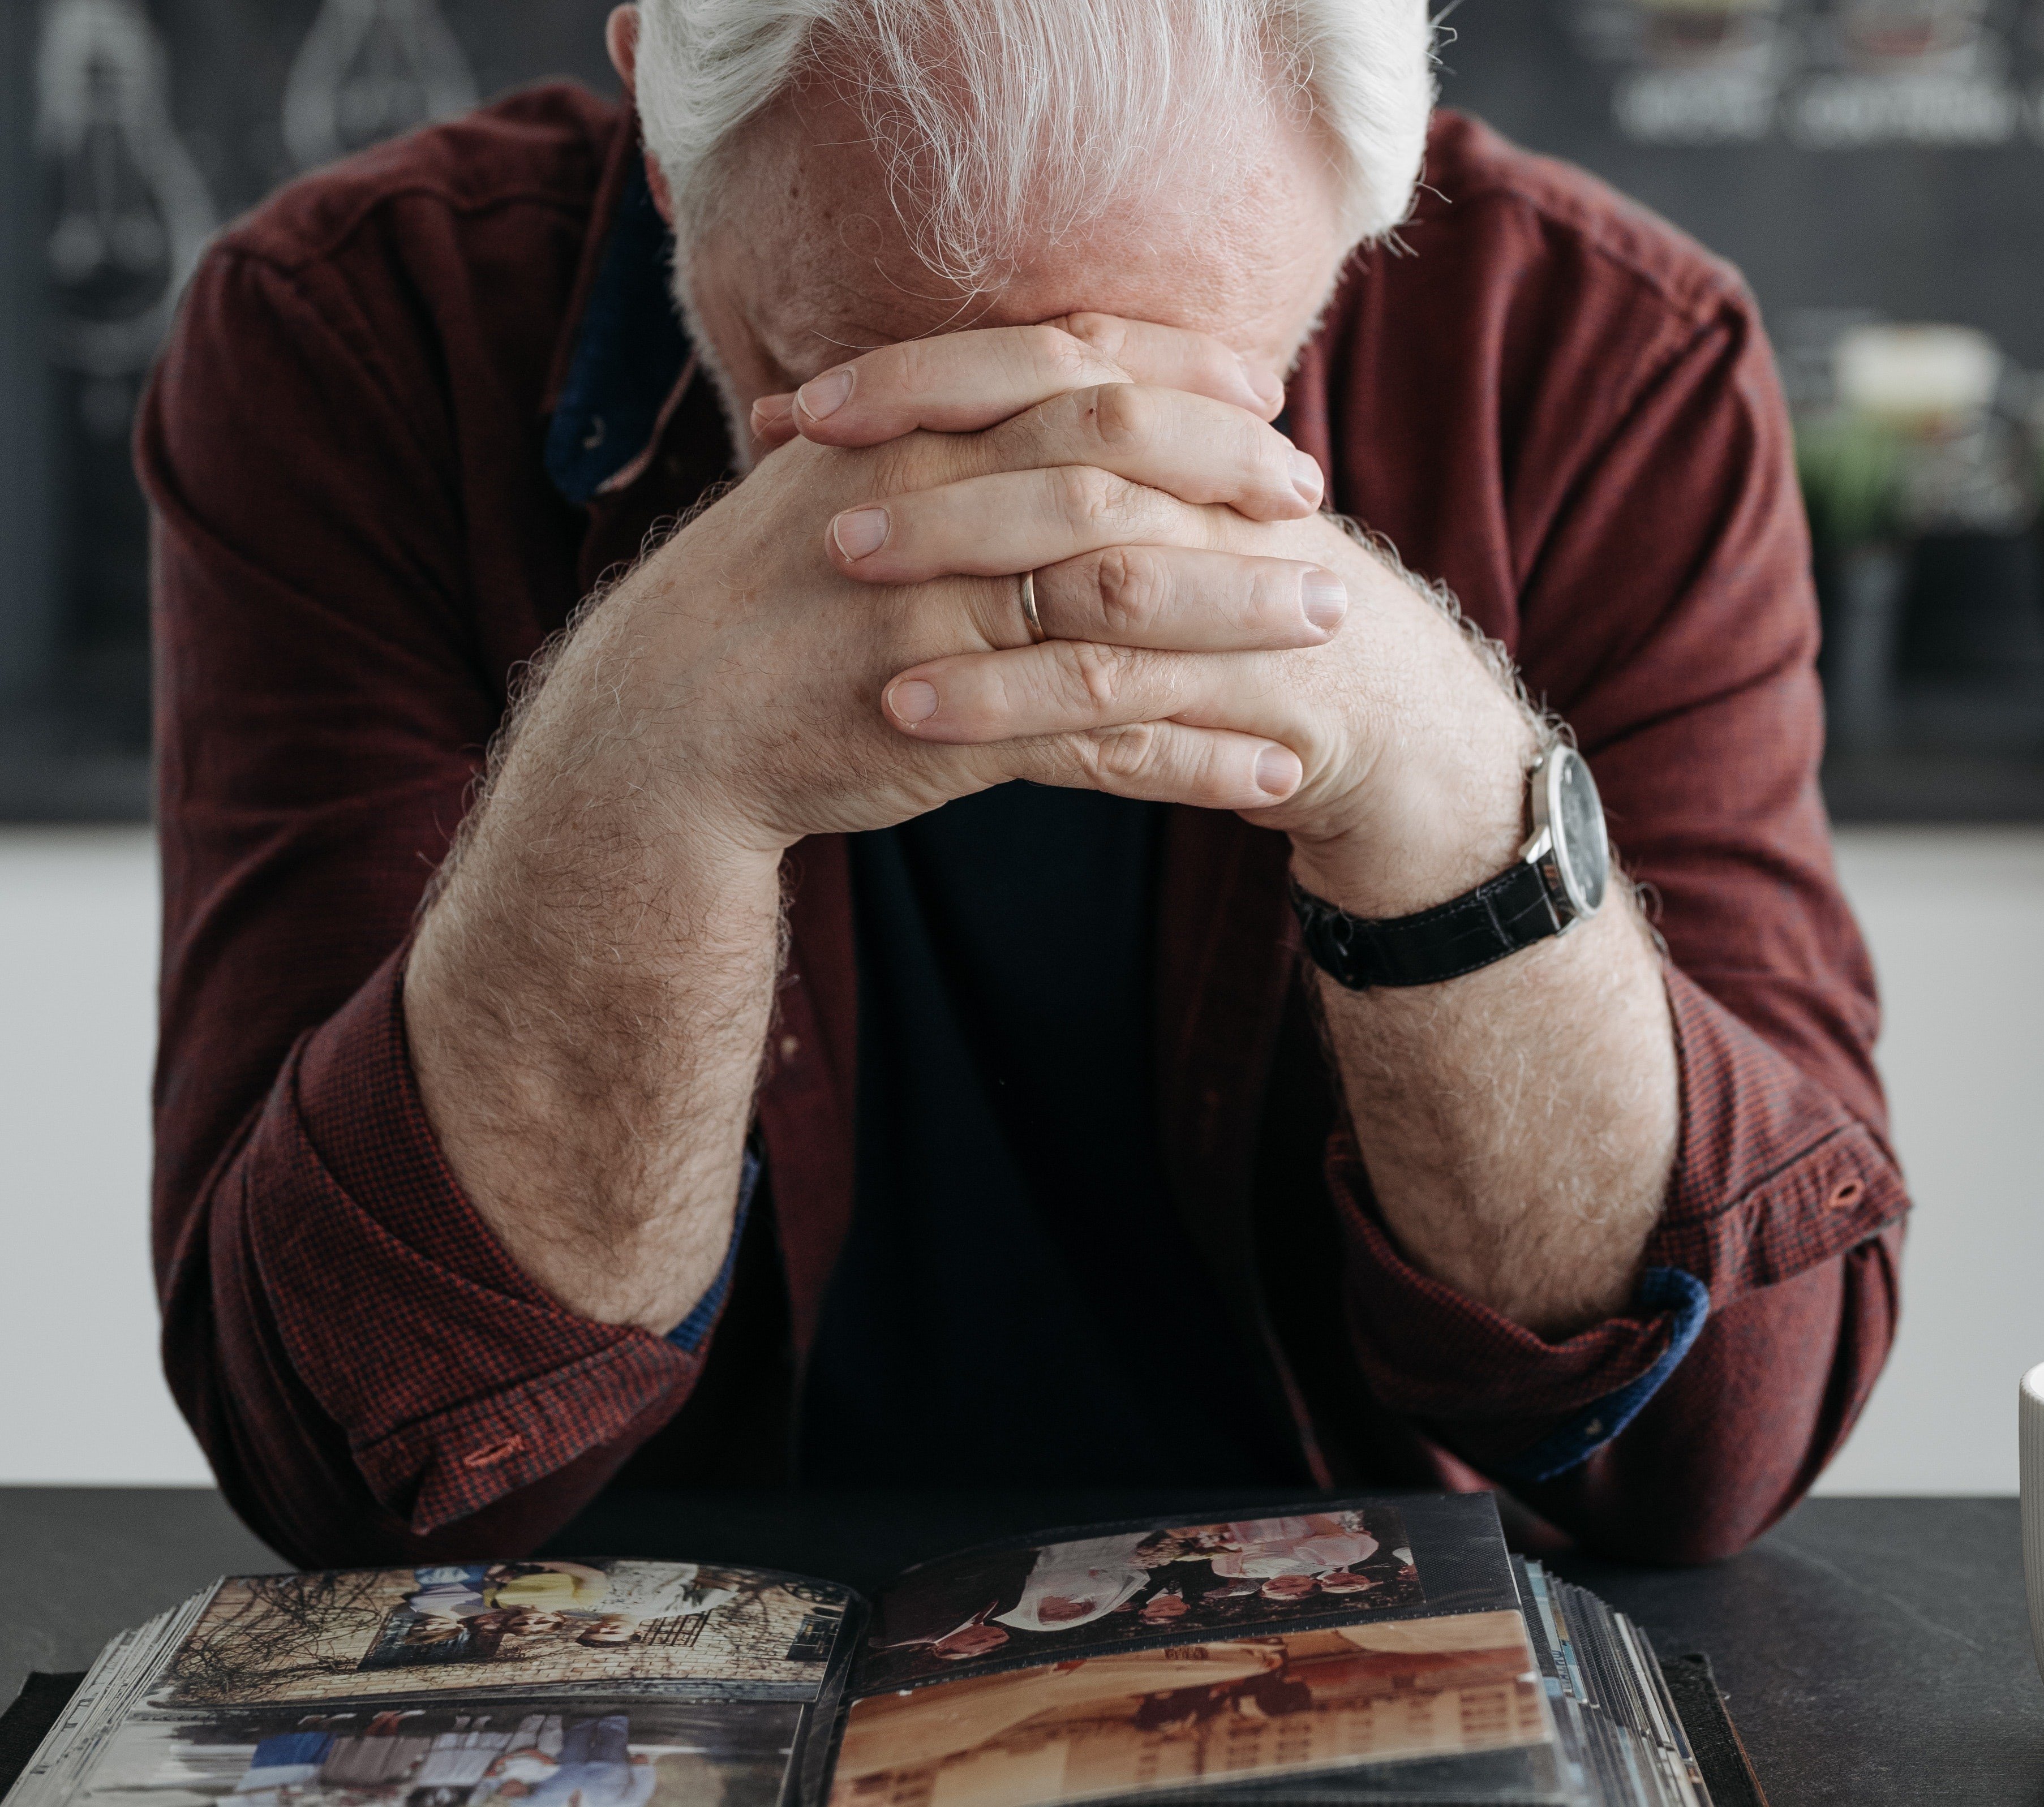 Joe Gibson found it difficult to move on from his beloved wife's loss. | Source: Pexels